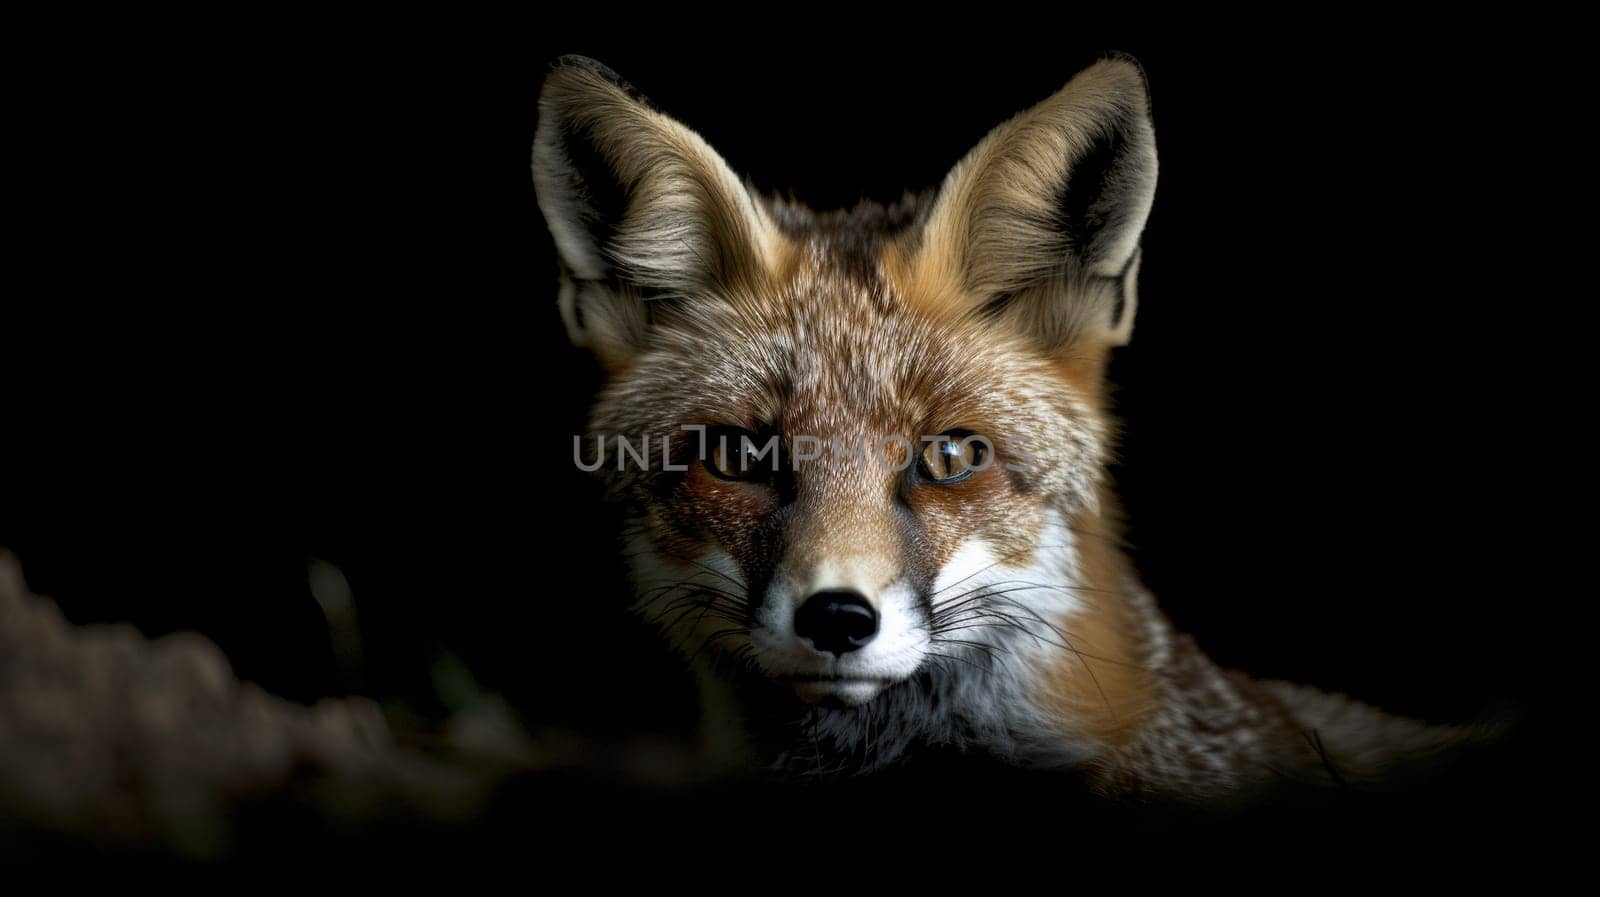 A close up of a fox with bright eyes in the dark